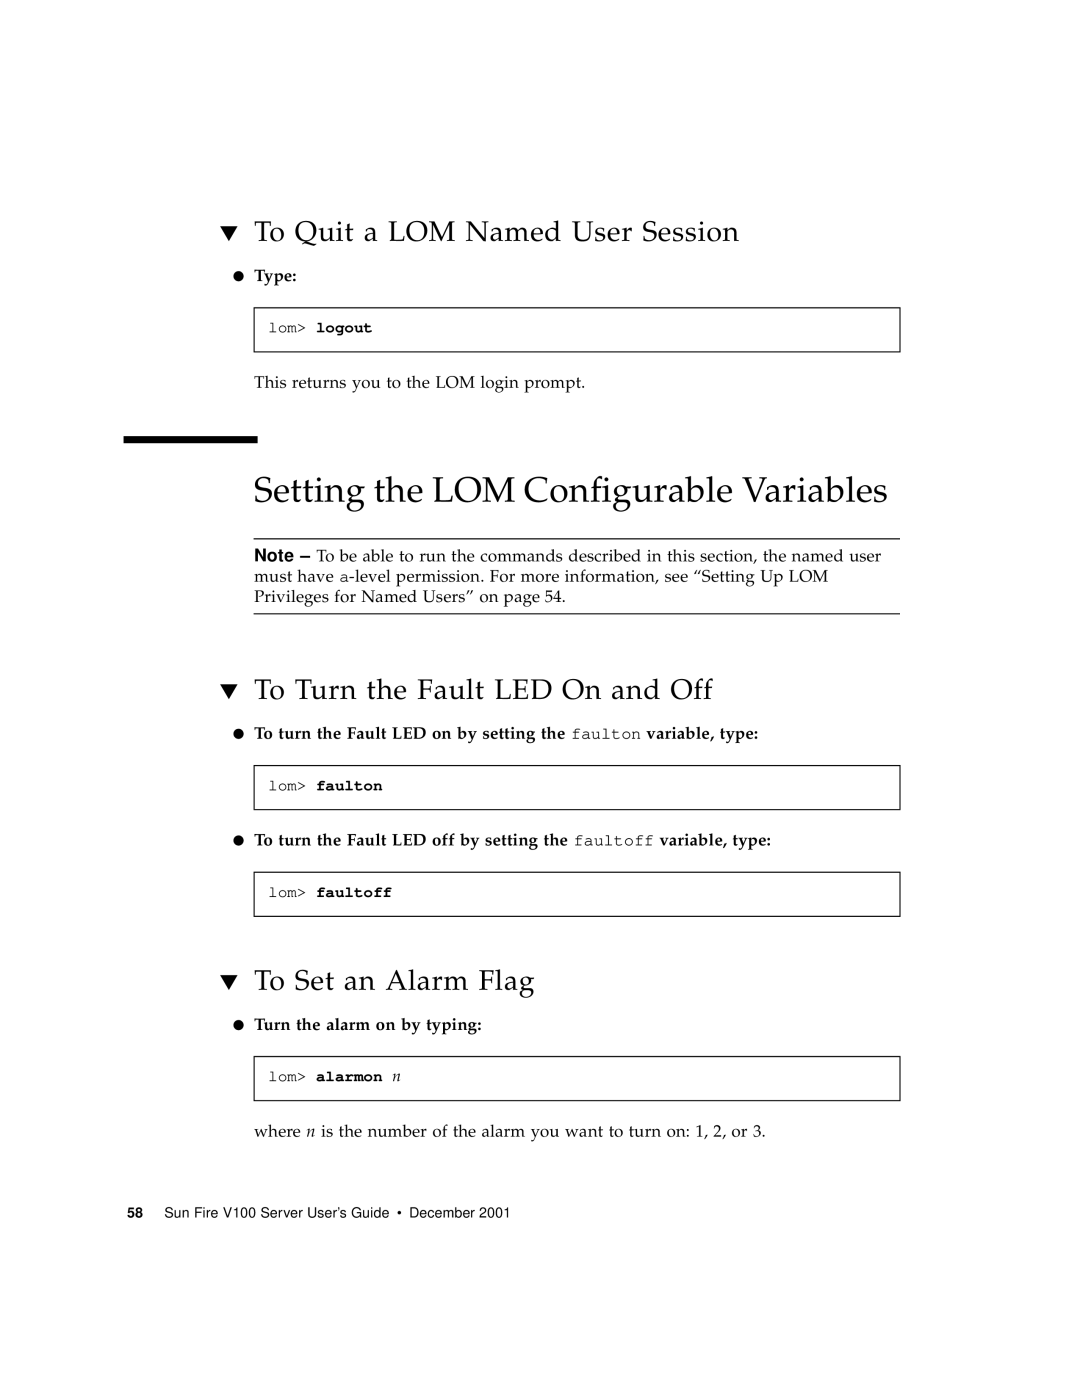 Sun Microsystems Sun Fire V100 manual Setting the LOM Configurable Variables, To Quit a LOM Named User Session, Type 